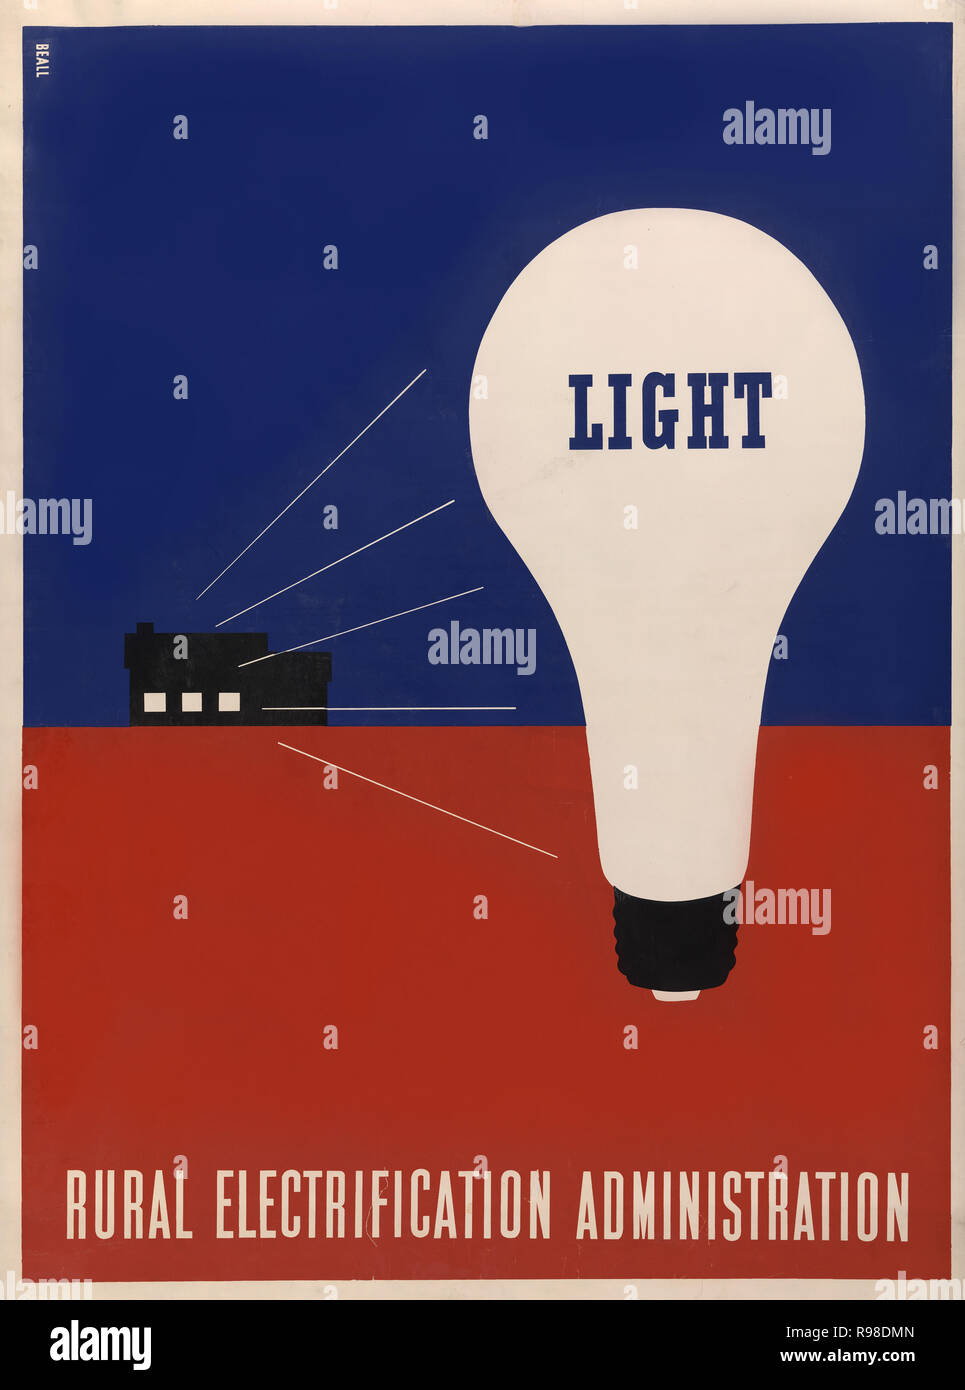 Poster Showing Large Light Bulb Labeled 'Light' in Foreground, Rural Farmhouse with Light Beaming from its Windows in Background, Rural Electrification, Administration, Artwork by Lester Beall, 1930's Stock Photo